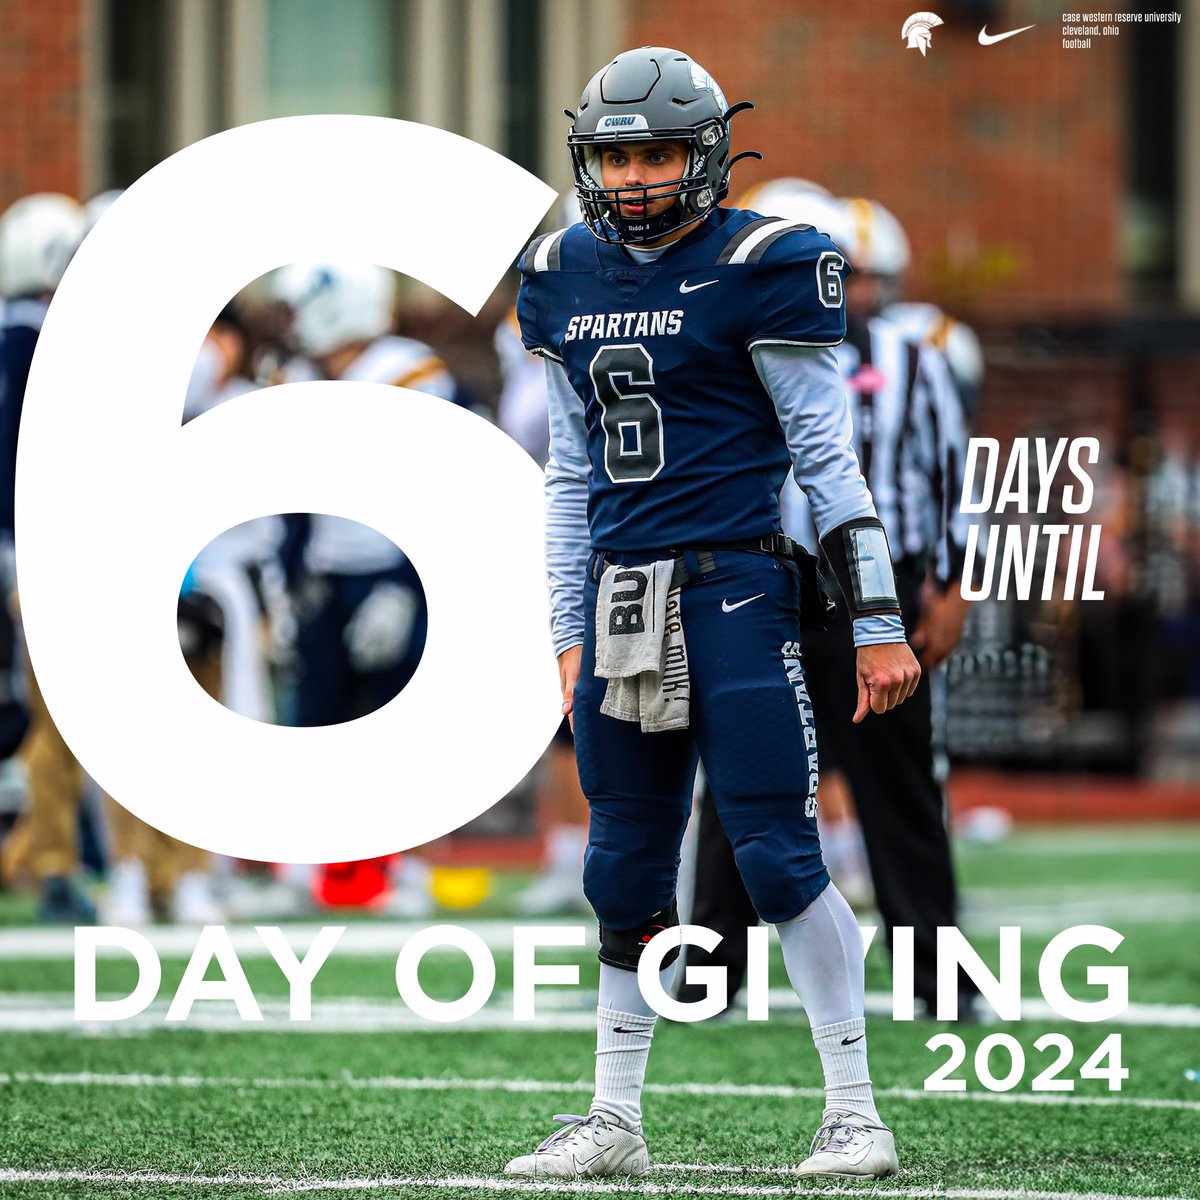 𝟔 𝐝𝐚𝐲𝐬 𝐮𝐧𝐭𝐢𝐥 𝐭𝐡𝐞 𝐃𝐚𝐲 𝐨𝐟 𝐆𝐢𝐯𝐢𝐧𝐠! Stay tuned for more information about the Day of Giving on April 10th! #d3fb #BlueCWRU #RollSpartans